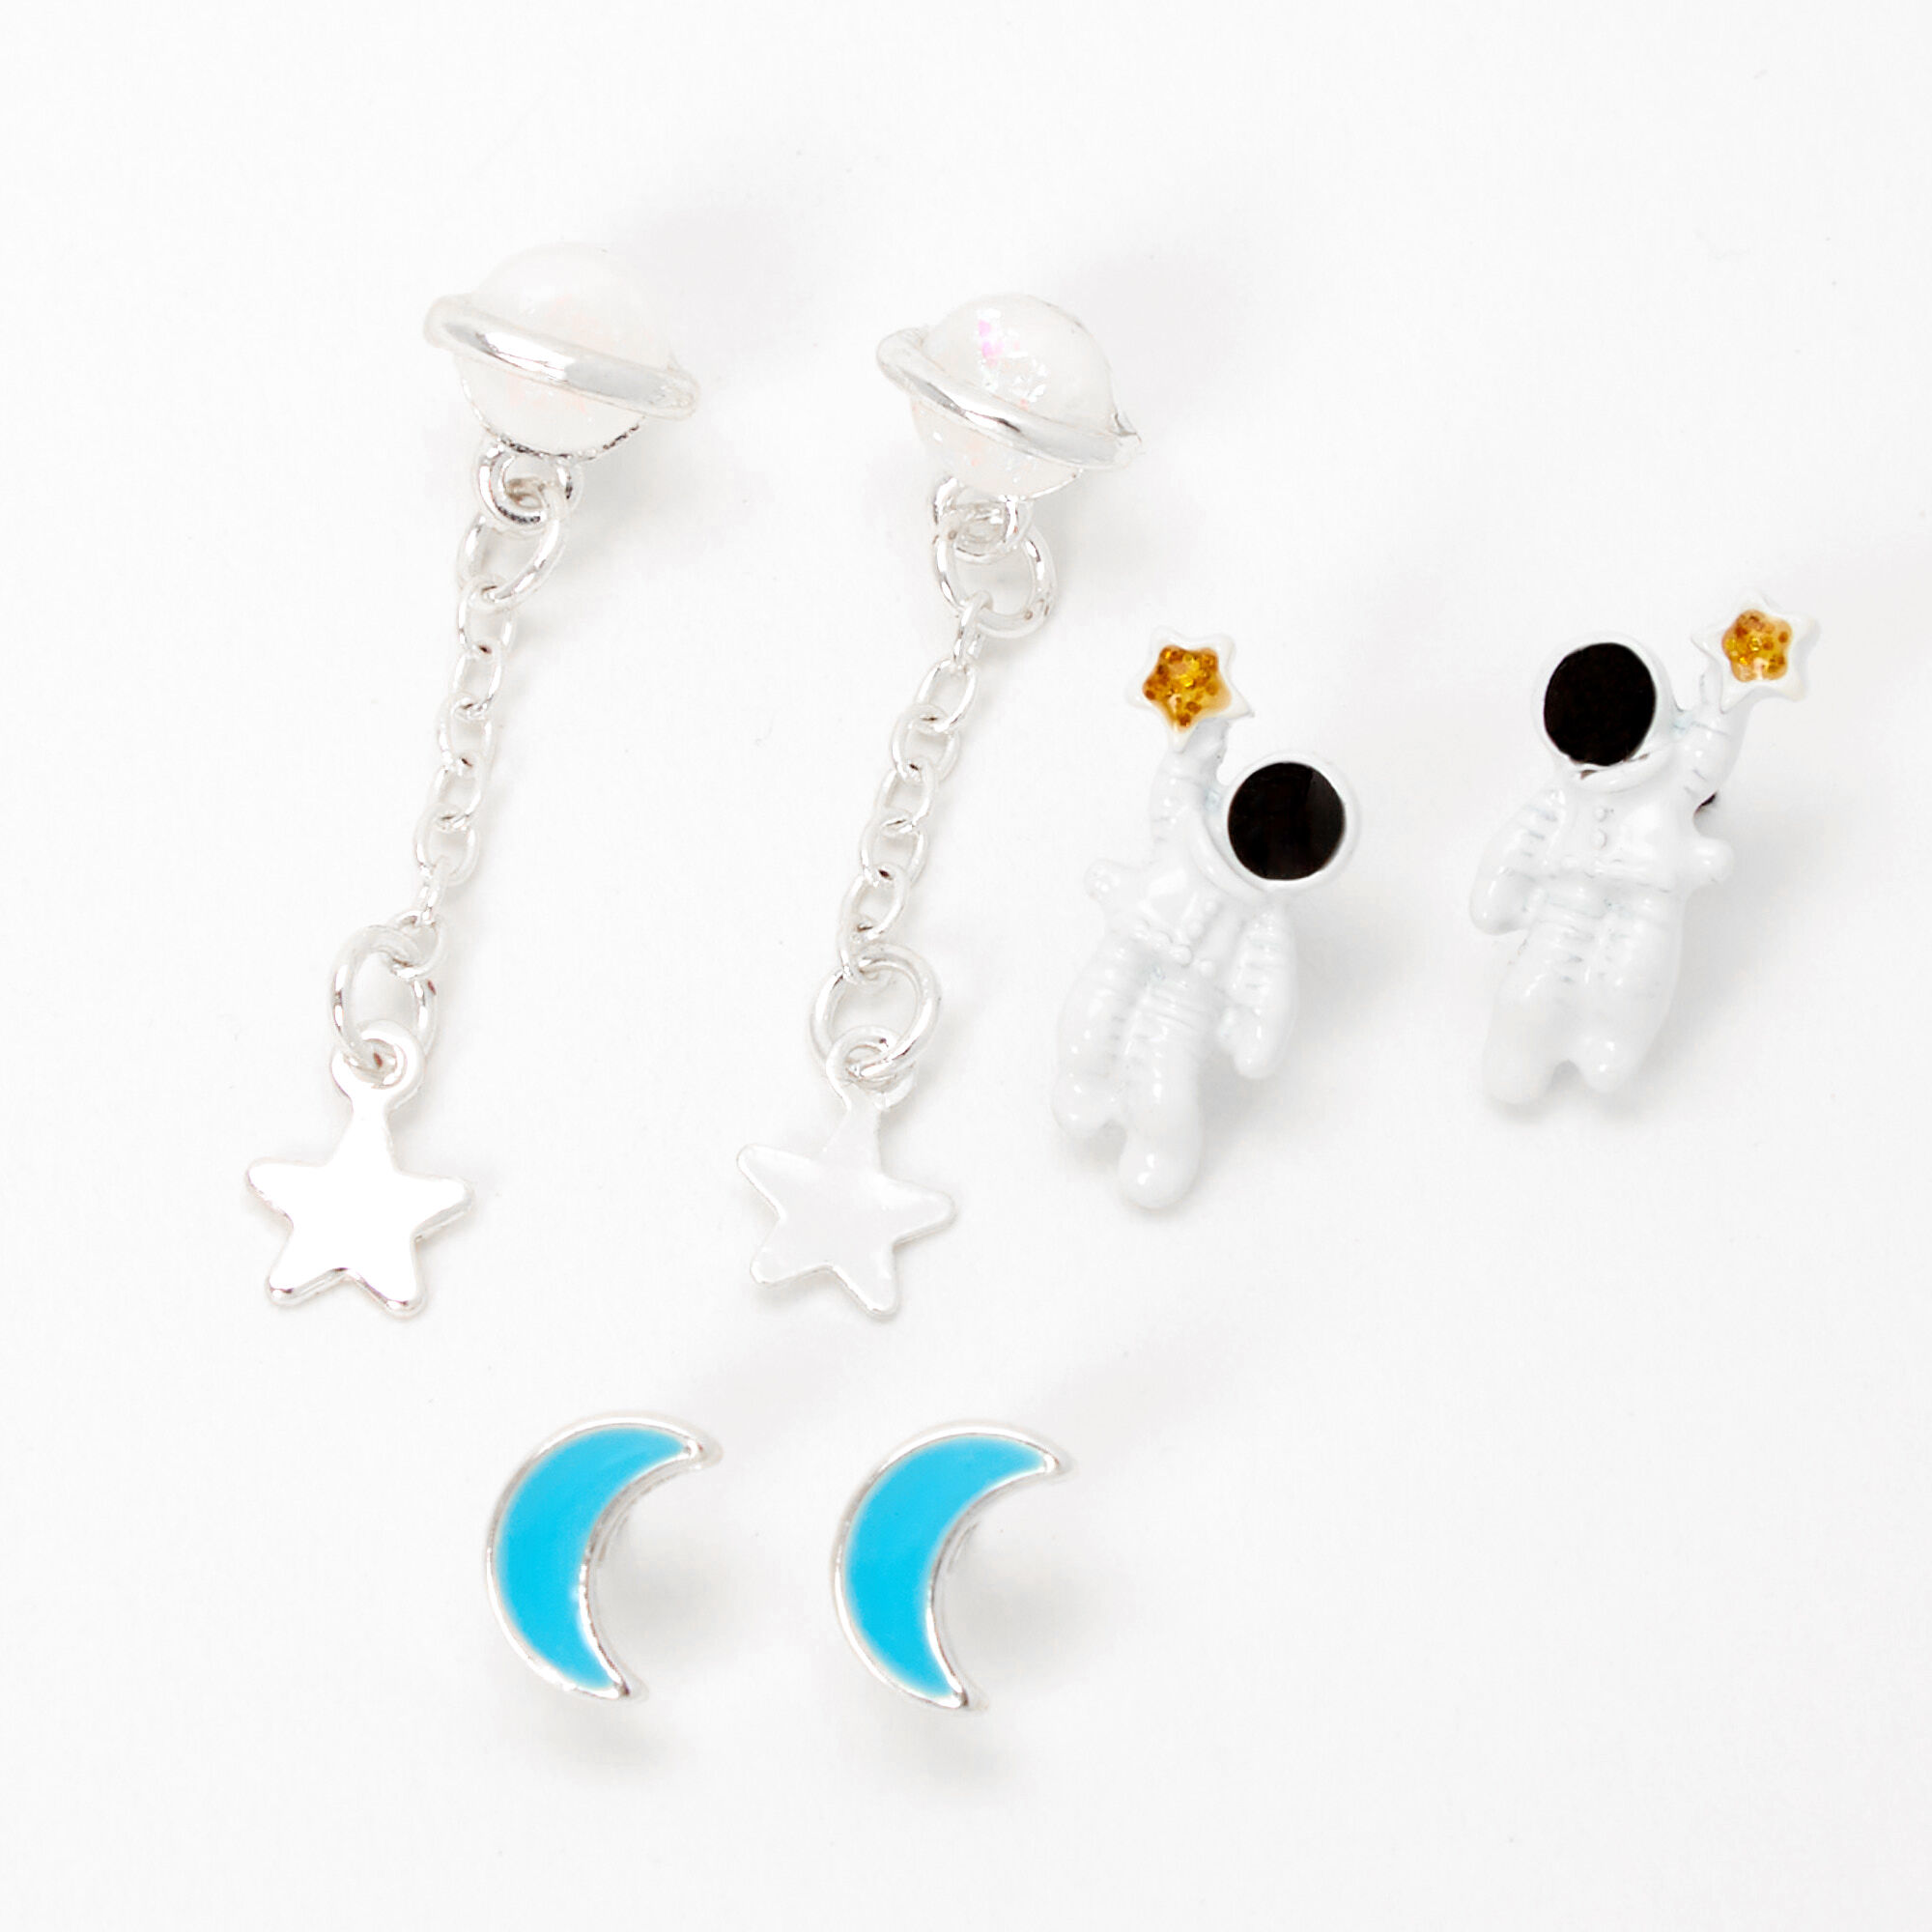 View Claires Astronaut Star Moon Stud Drop Earrings 3 Pack Blue information